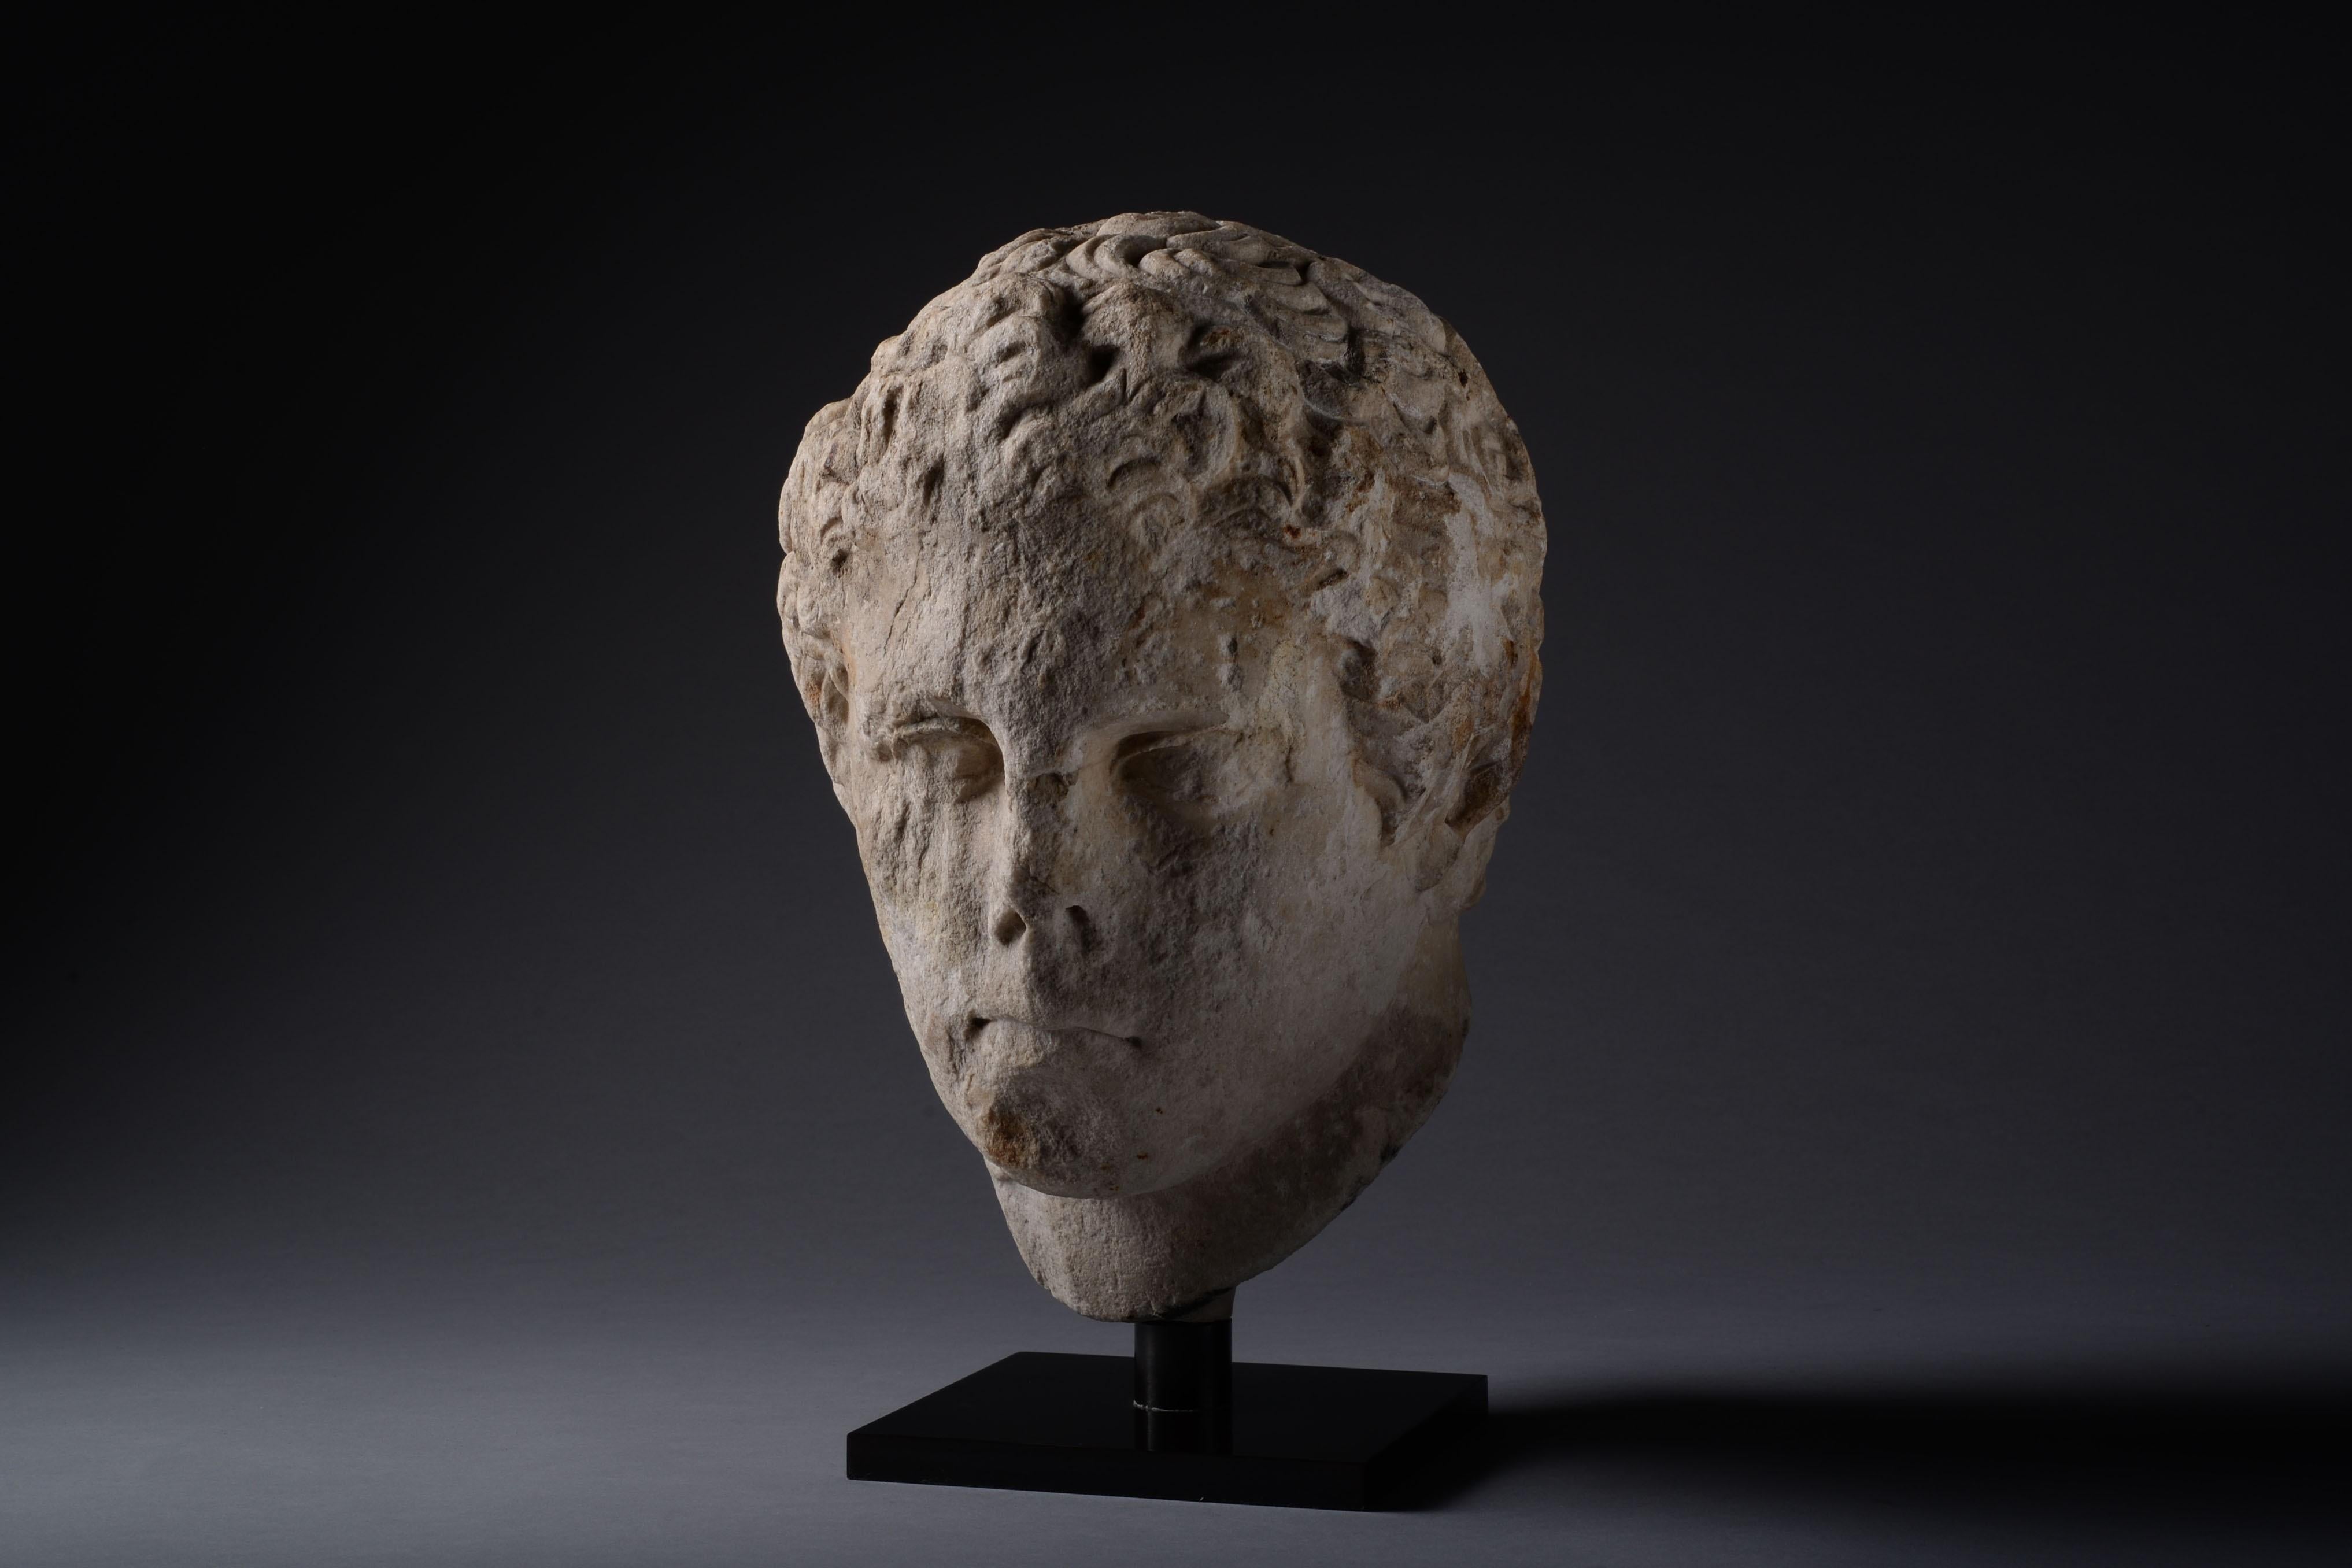 This powerful piece of Hellenistic sculpture is full of pathos. It depicts the idealised head of an athlete, with hair arranged in short locks around a broad forehead and expressive, deeply set eyes.

Athletic prowess was highly valued by the